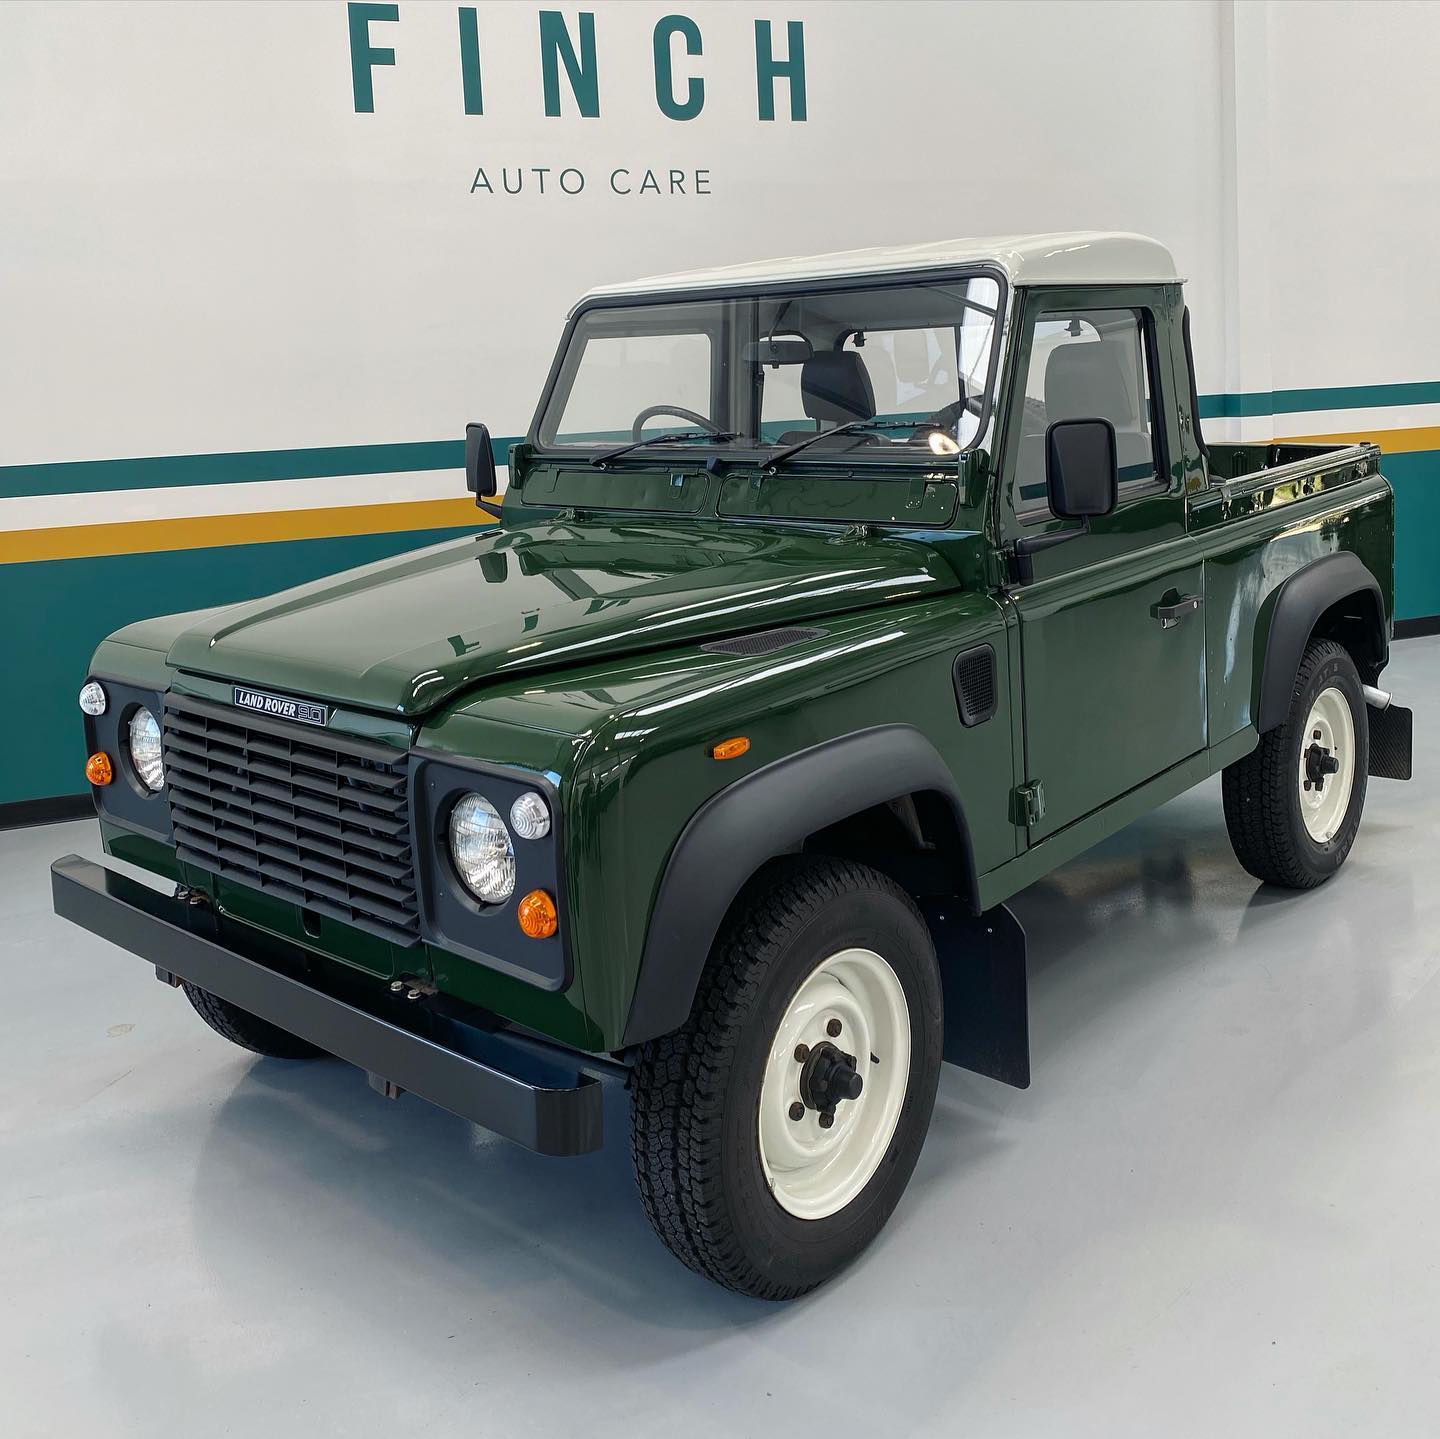 Green land rover defender pickup in a showroom setting.